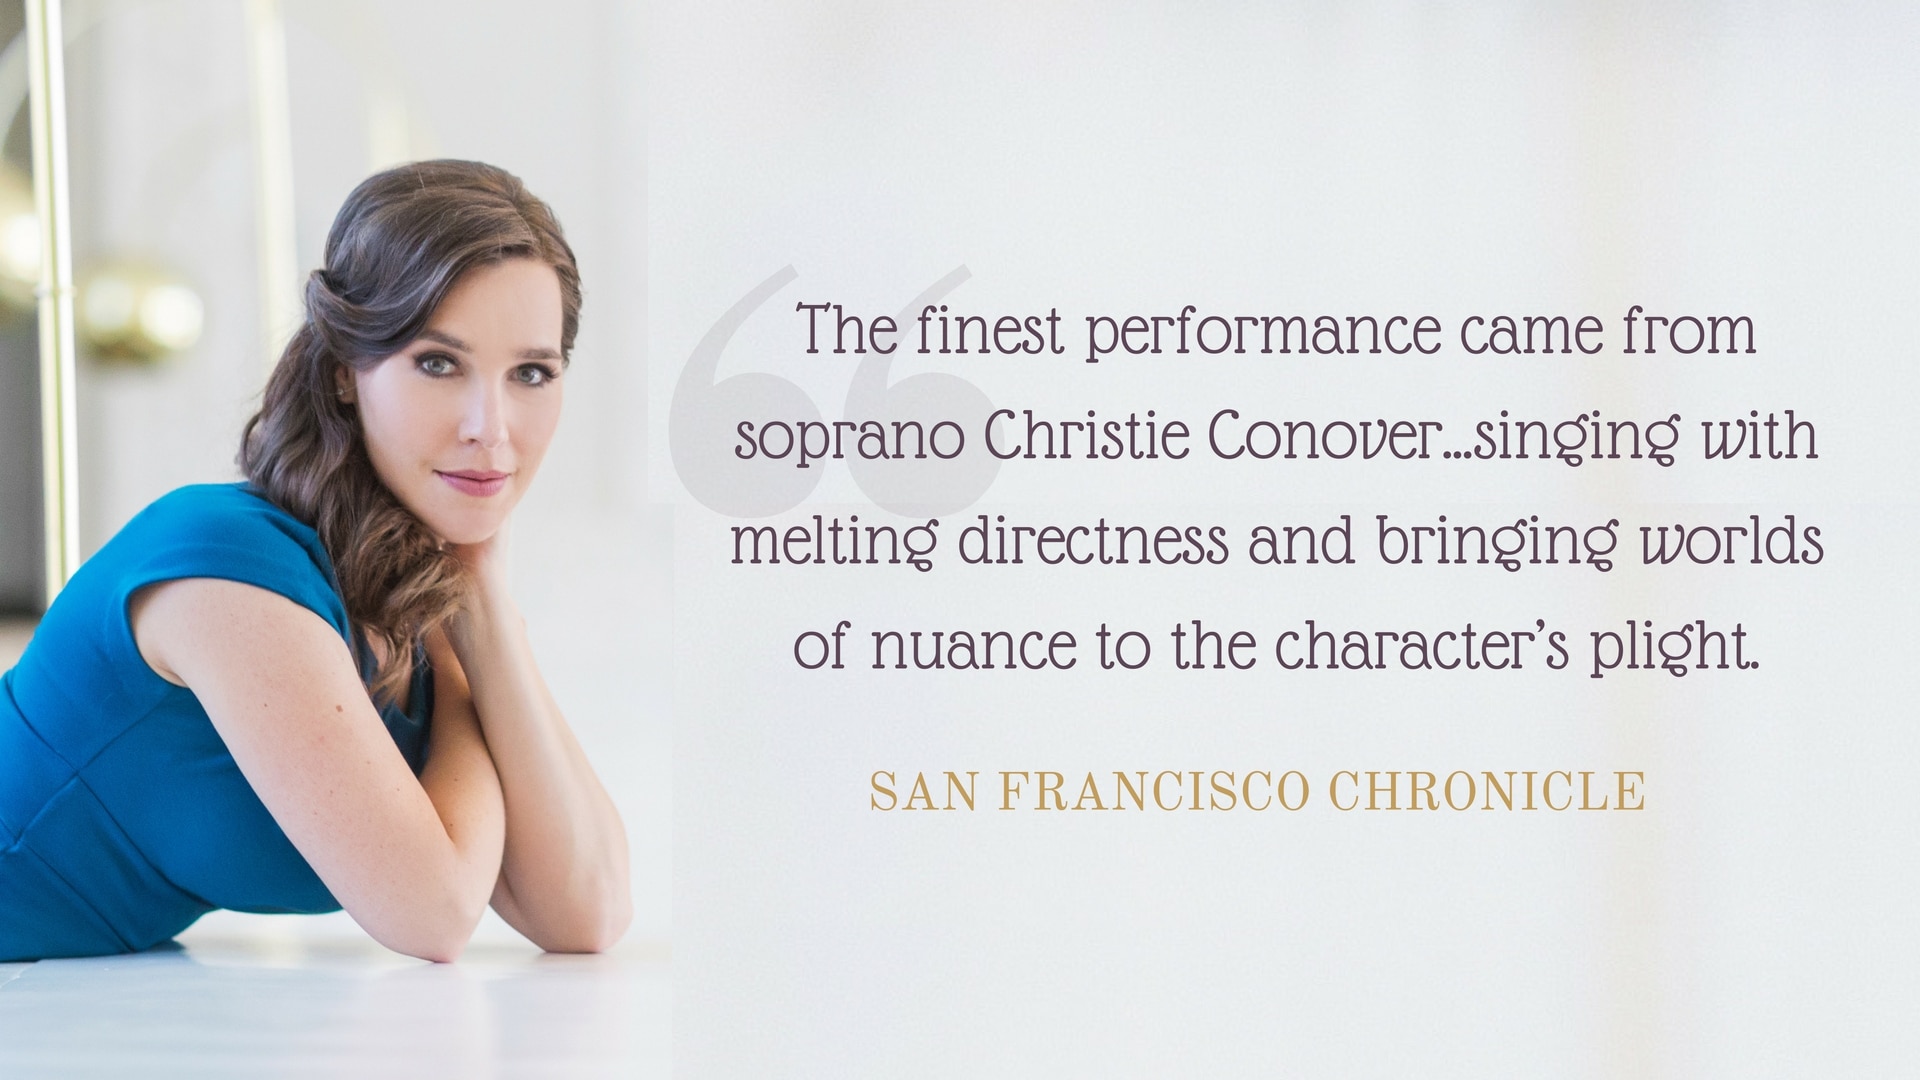 San Francisco Chronicle says "the finest performance came from soprano Christie Conover..."